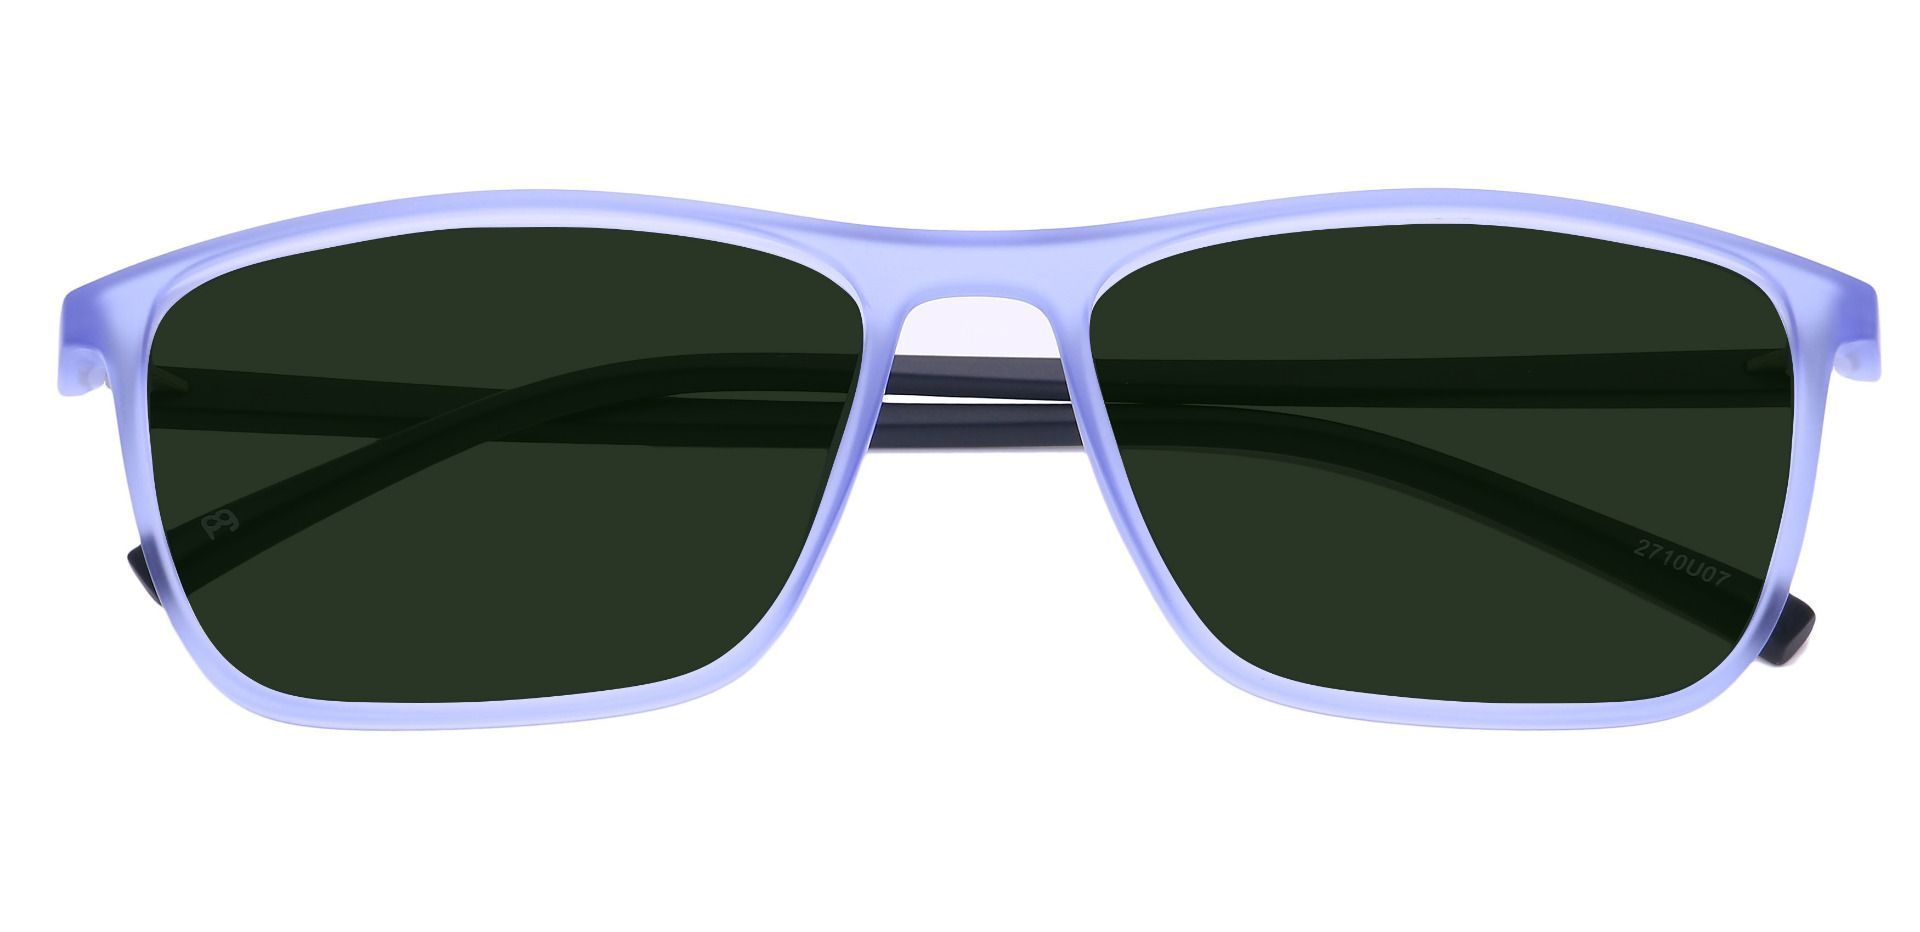 Candid Rectangle Reading Sunglasses - Blue Frame With Green Lenses